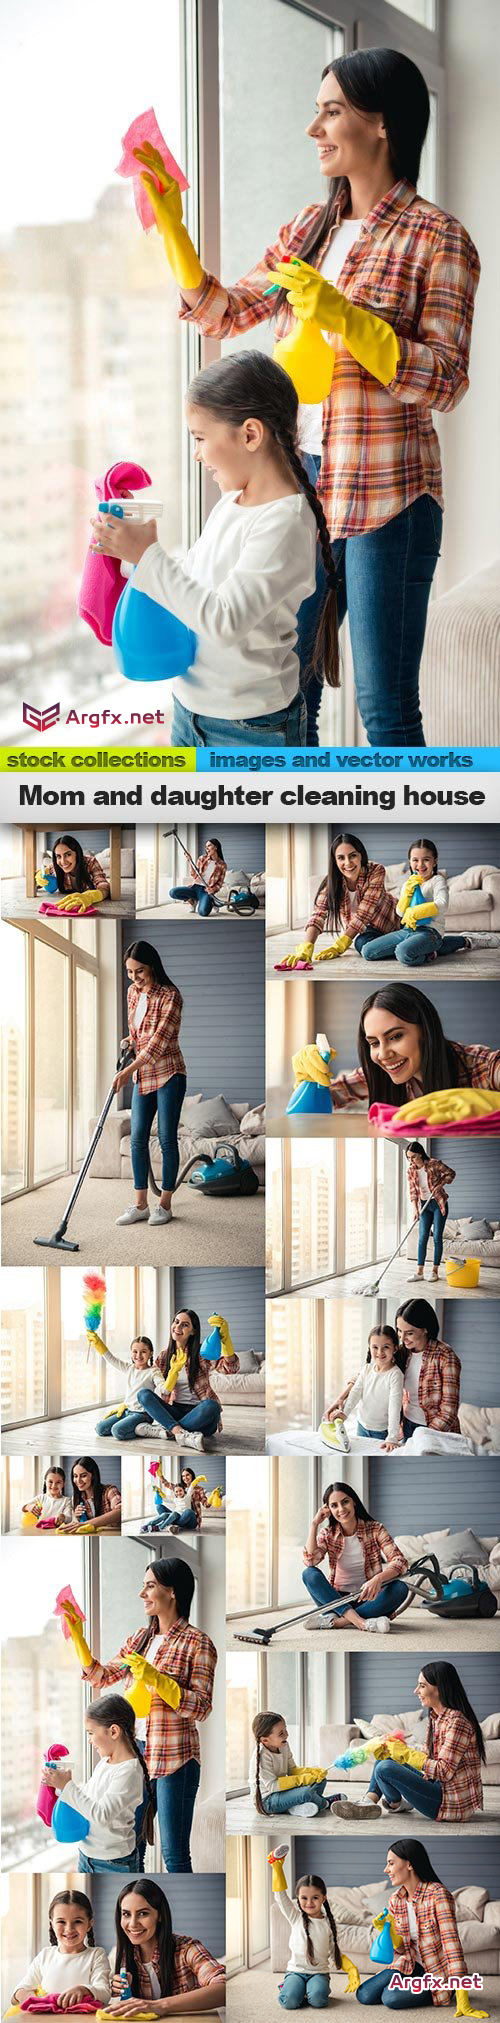 Mom and daughter cleaning house, 15 x UHQ JPEG